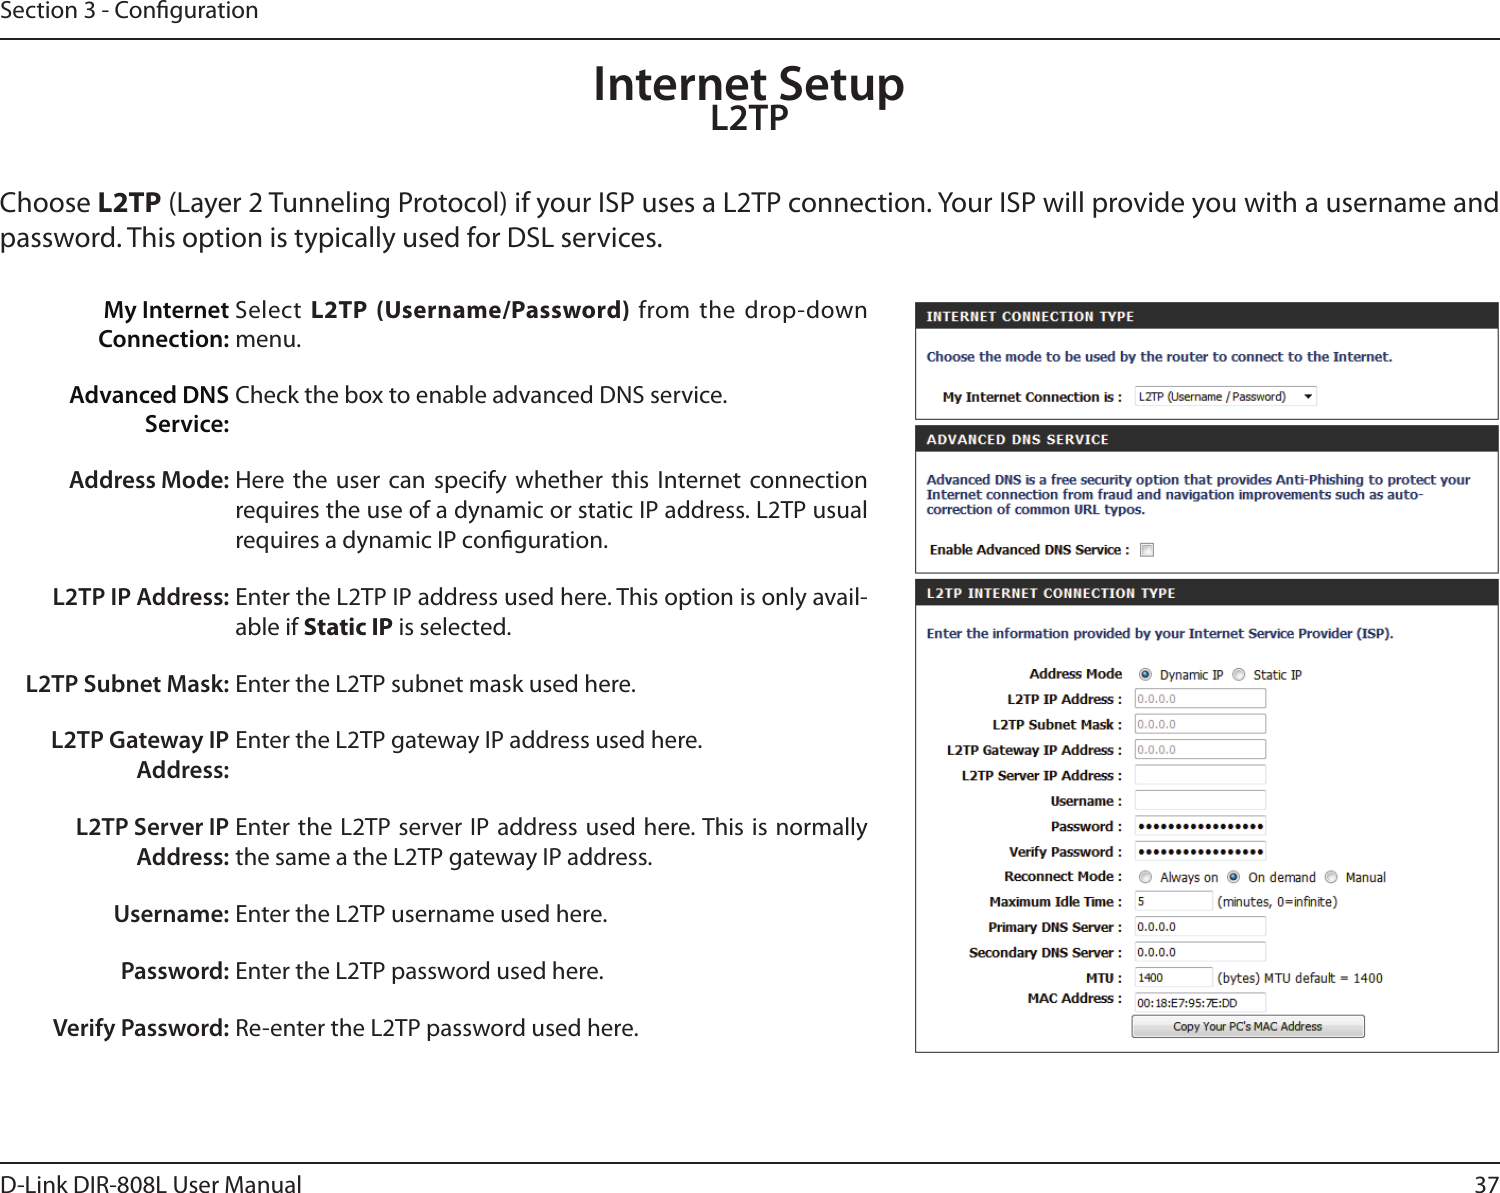 37D-Link DIR-808L User ManualSection 3 - CongurationInternet SetupL2TPChoose L2TP (Layer 2 Tunneling Protocol) if your ISP uses a L2TP connection. Your ISP will provide you with a username and password. This option is typically used for DSL services. My Internet Connection:Select  L2TP (Username/Password) from the  drop-down menu.Advanced DNSService:Check the box to enable advanced DNS service.Address Mode: Here  the  user  can  specify  whether  this  Internet  connection requires the use of a dynamic or static IP address. L2TP usual requires a dynamic IP conguration.L2TP IP Address: Enter the L2TP IP address used here. This option is only avail-able if Static IP is selected.L2TP Subnet Mask: Enter the L2TP subnet mask used here.L2TP Gateway IP Address:Enter the L2TP gateway IP address used here.L2TP Server IP Address:Enter the L2TP server IP address used here. This is normally the same a the L2TP gateway IP address.Username: Enter the L2TP username used here.Password: Enter the L2TP password used here.Verify Password: Re-enter the L2TP password used here.